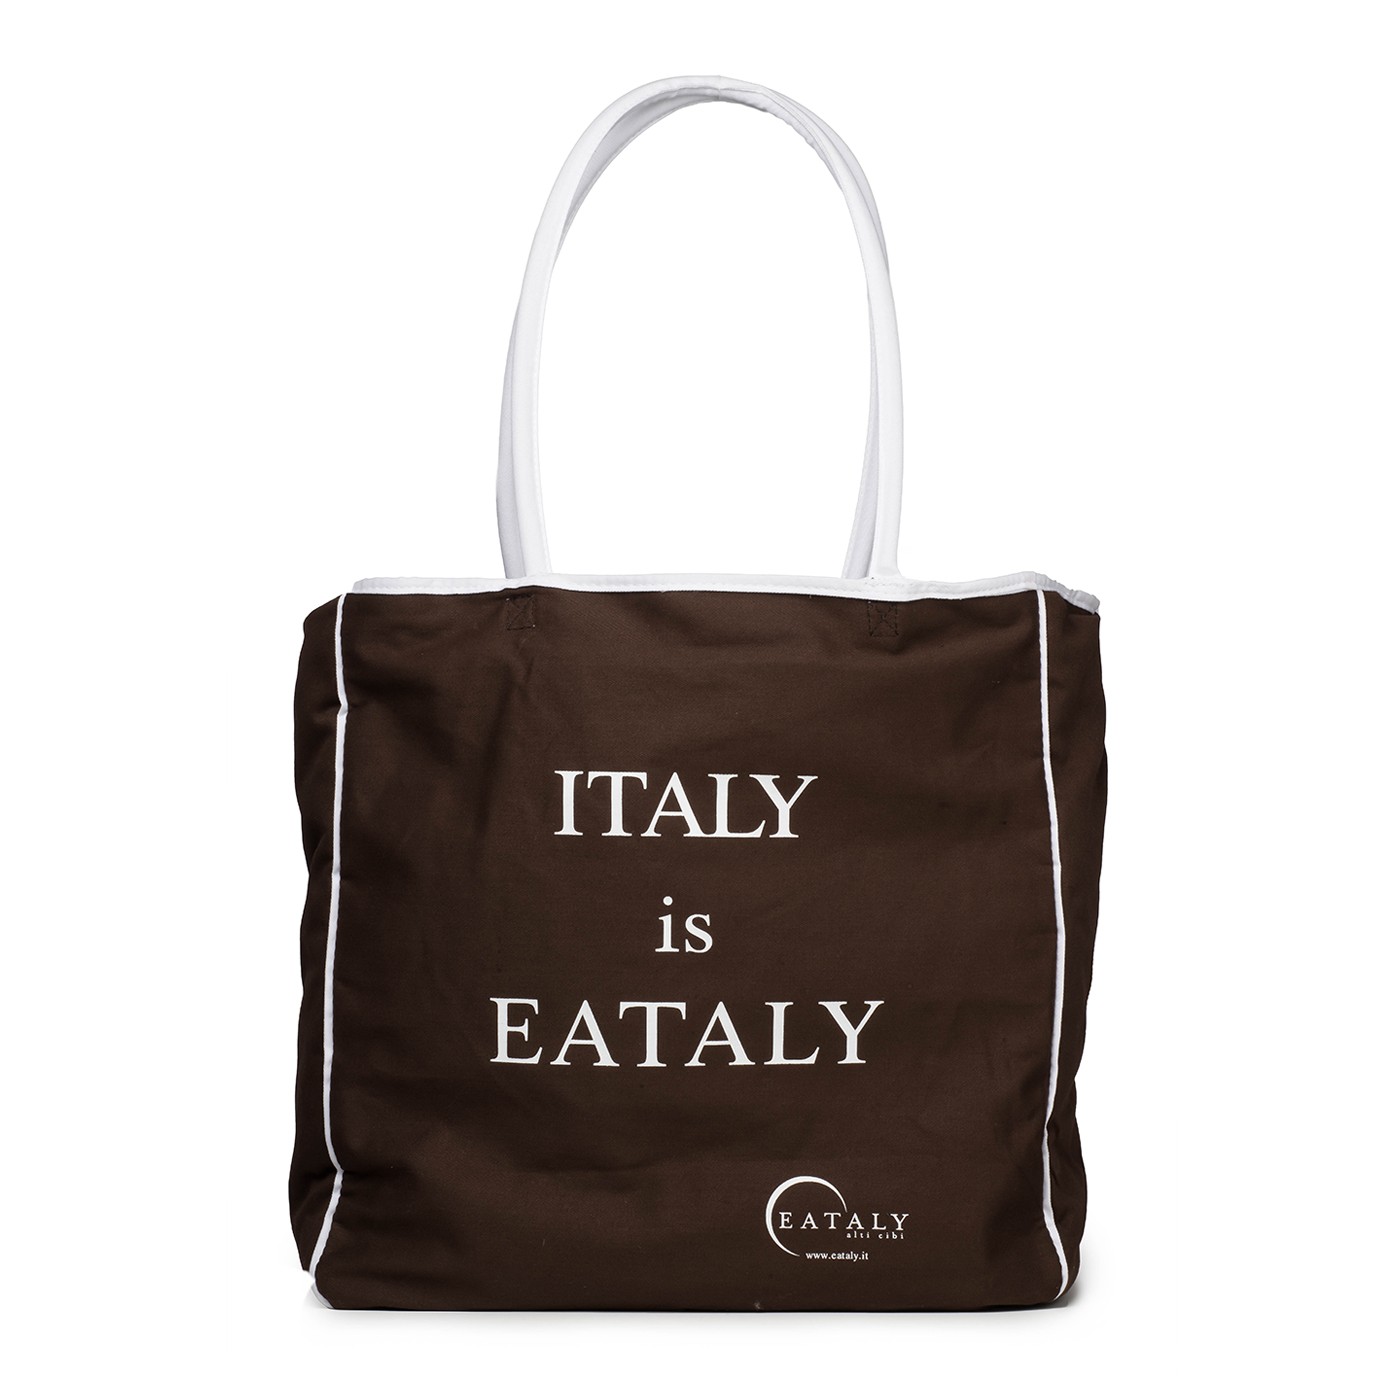 Italy is Eataly Zipper Tote Bag - Brown - Made in Eataly | Eataly